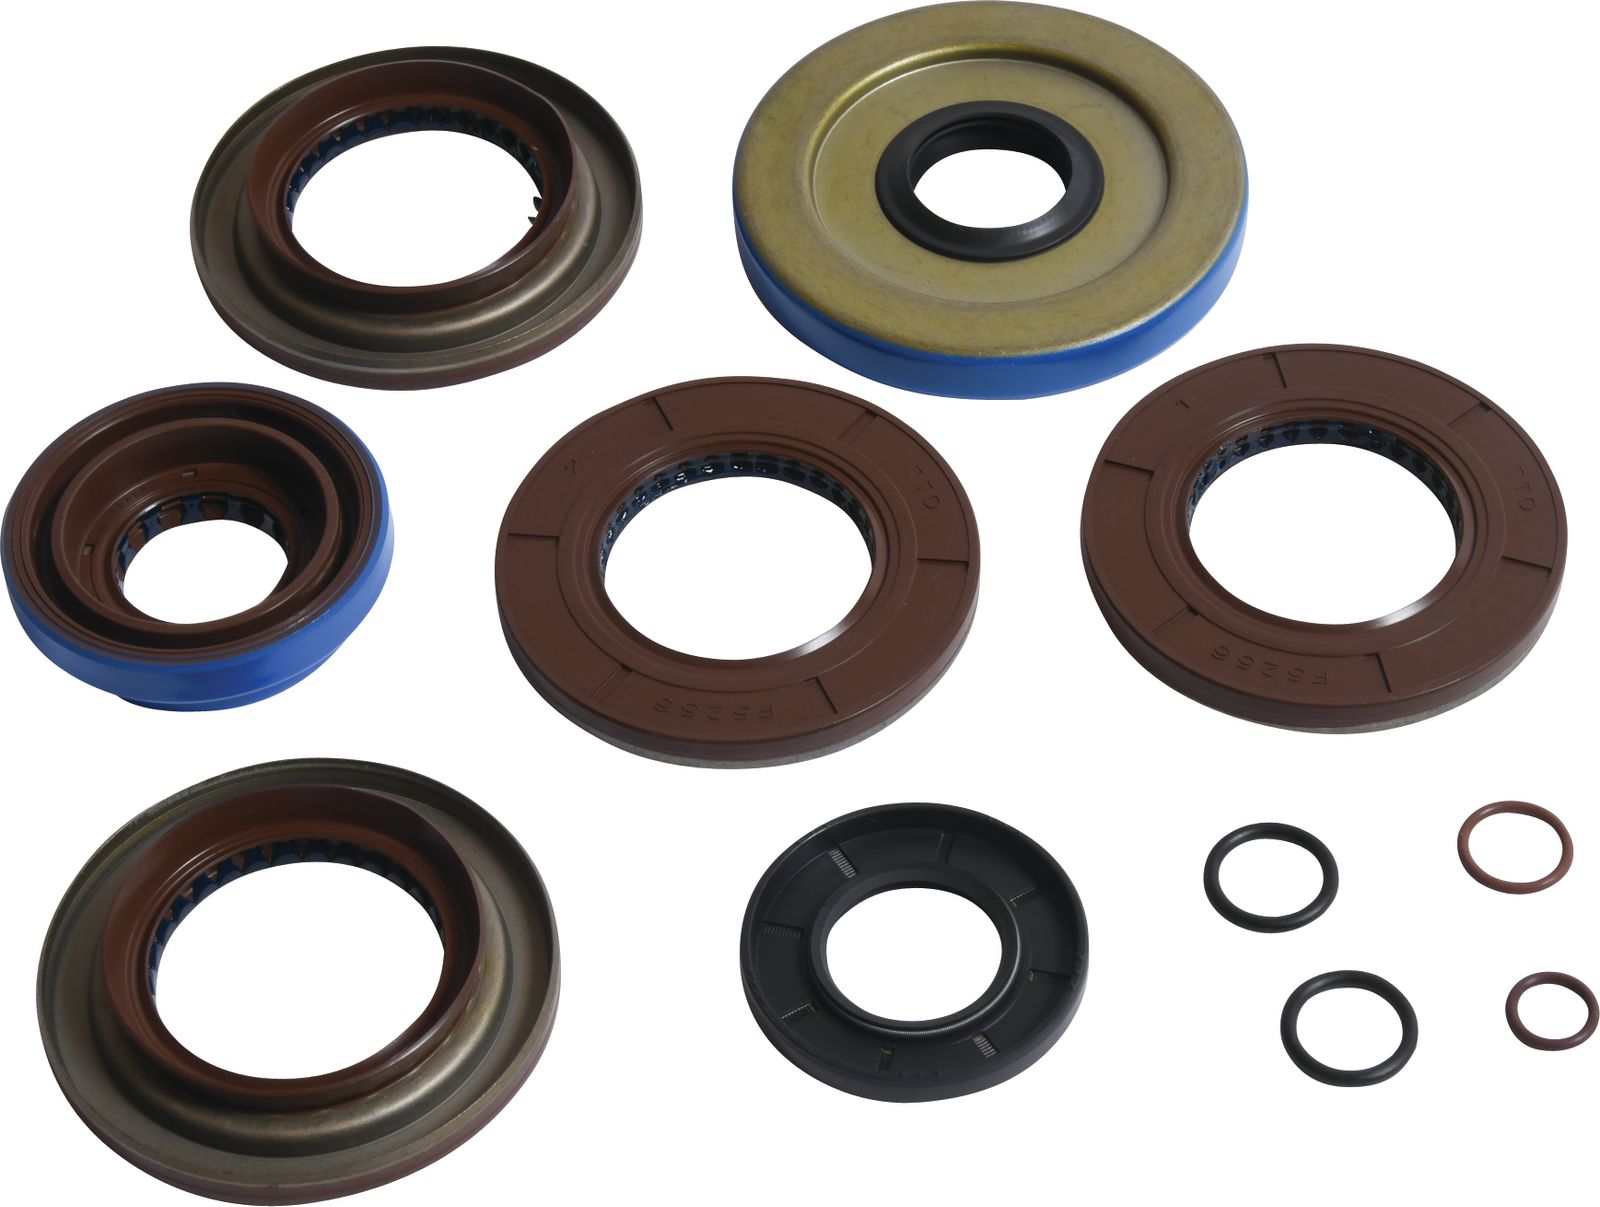 Wrp Diff Seal Kits - WRP252124-5 image